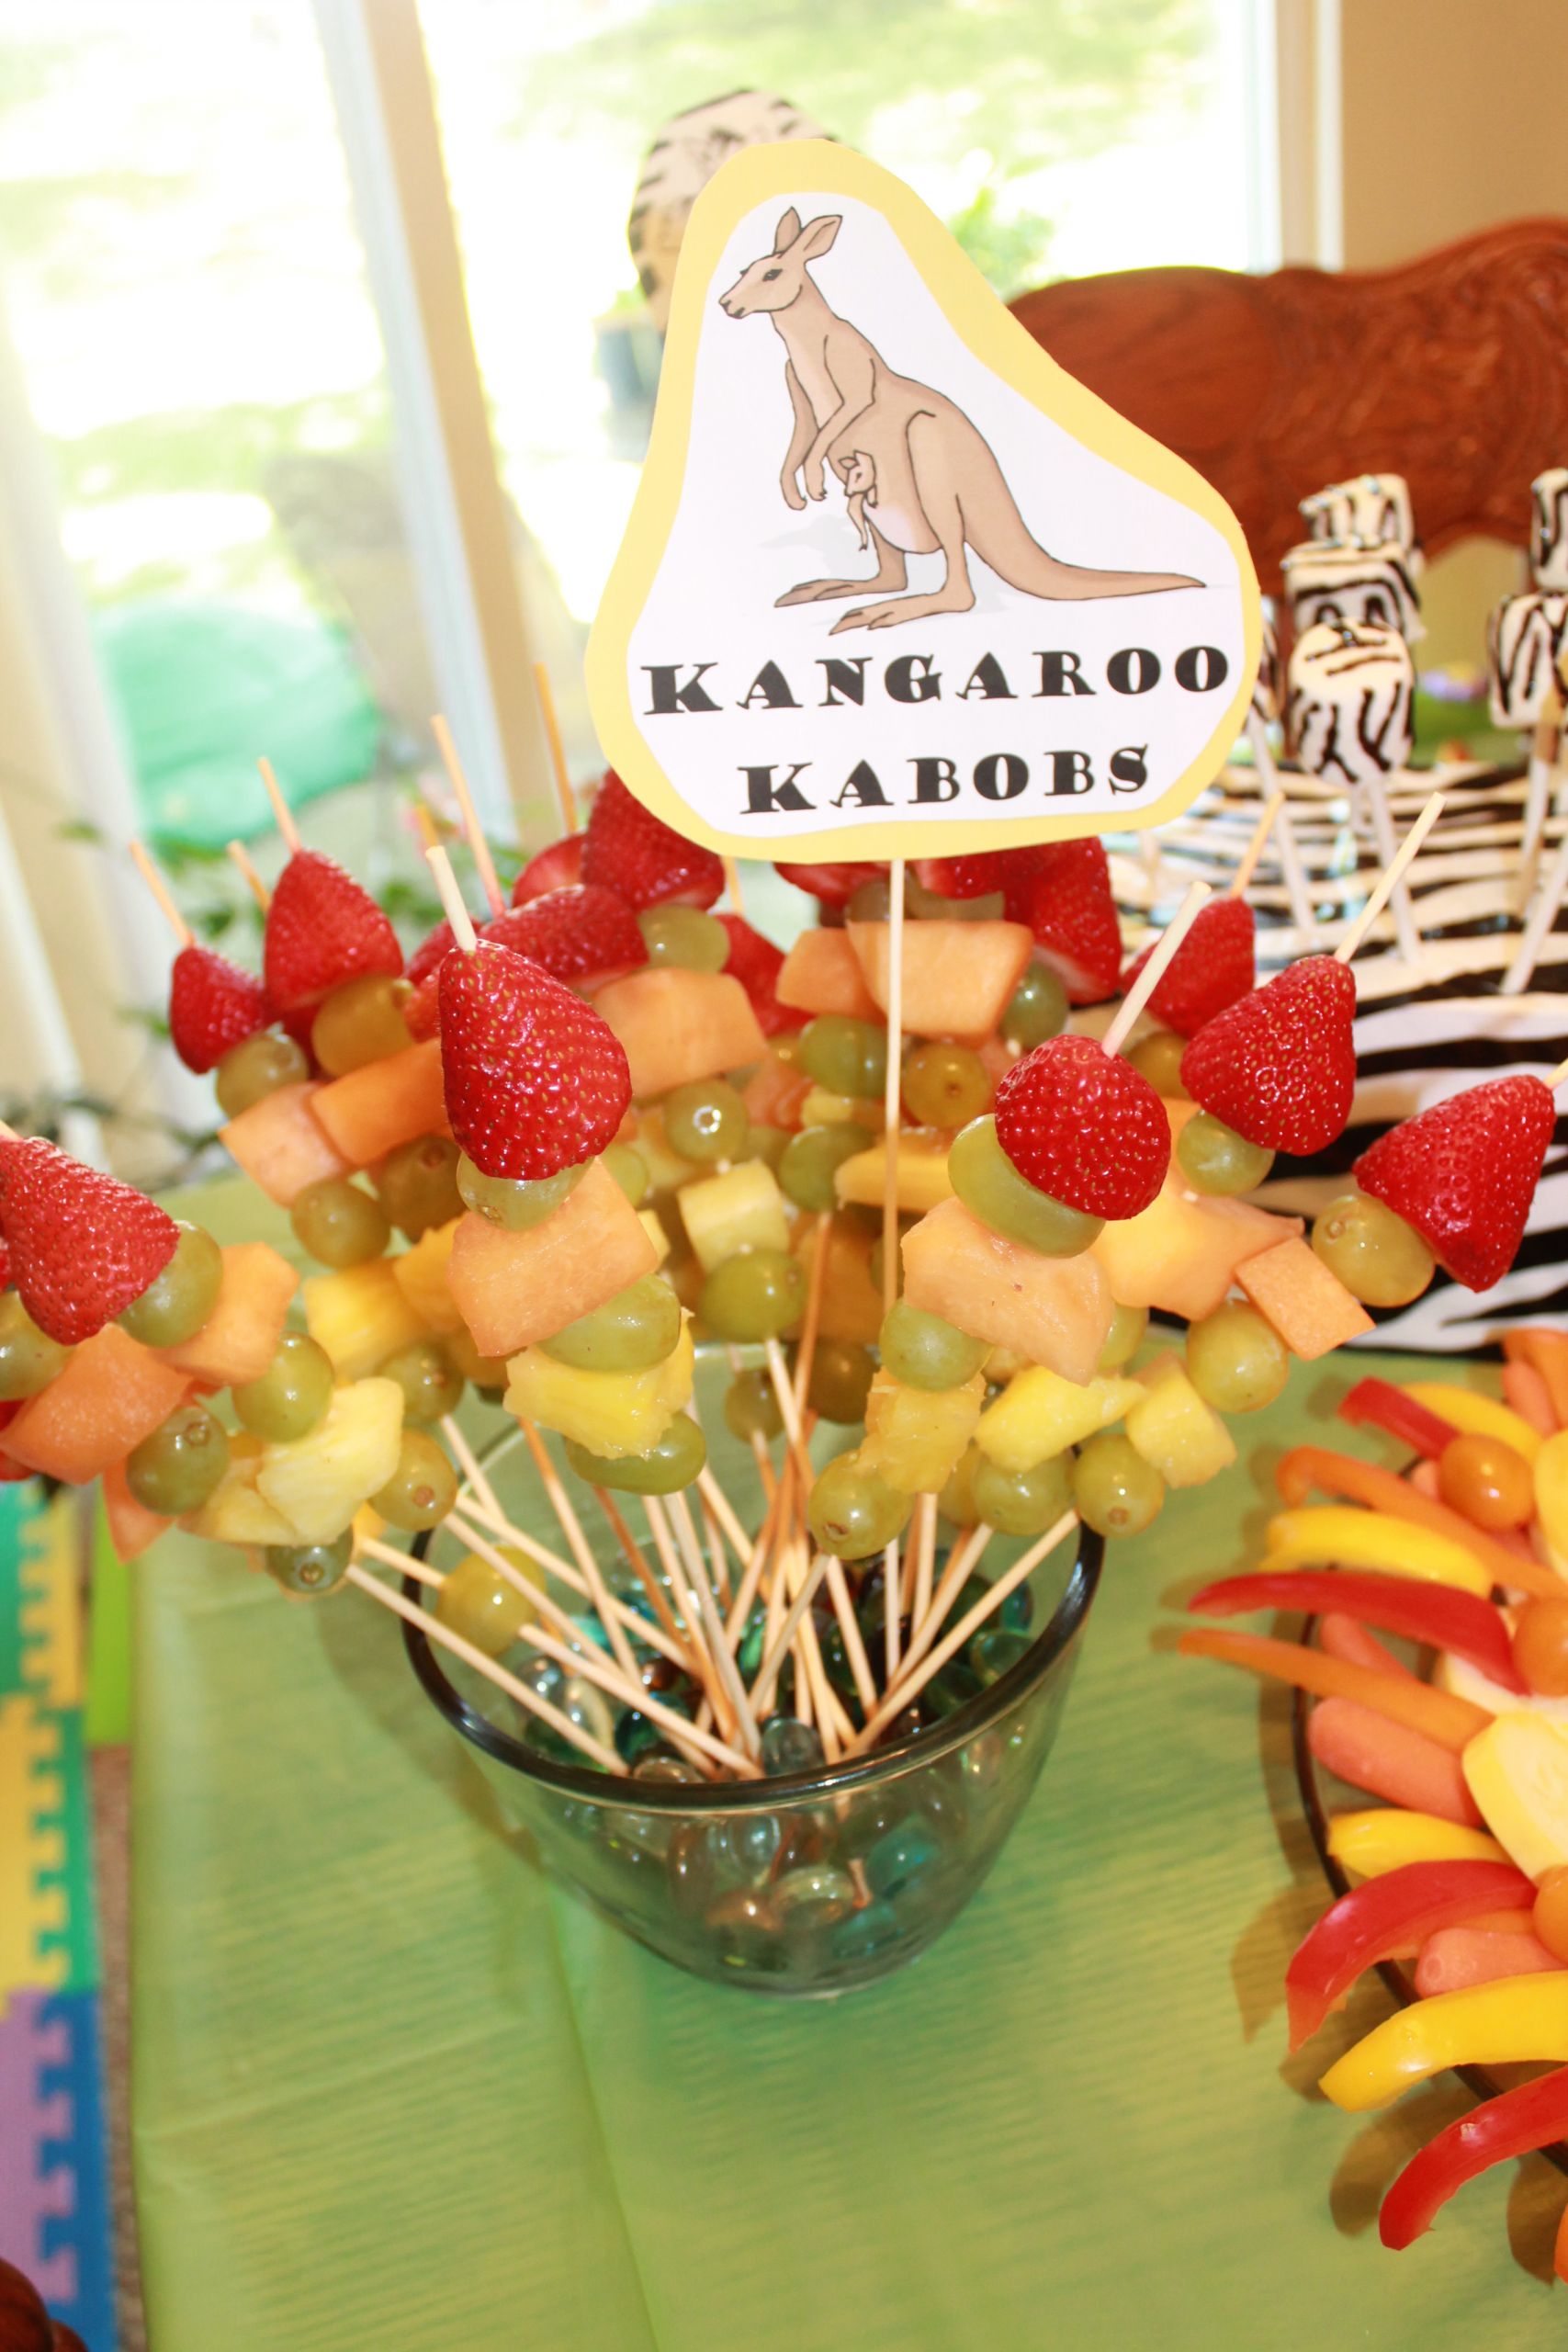 Baby Birthday Party Food Ideas
 Kangaro kabobs and other fabulous food ideas for a zoo